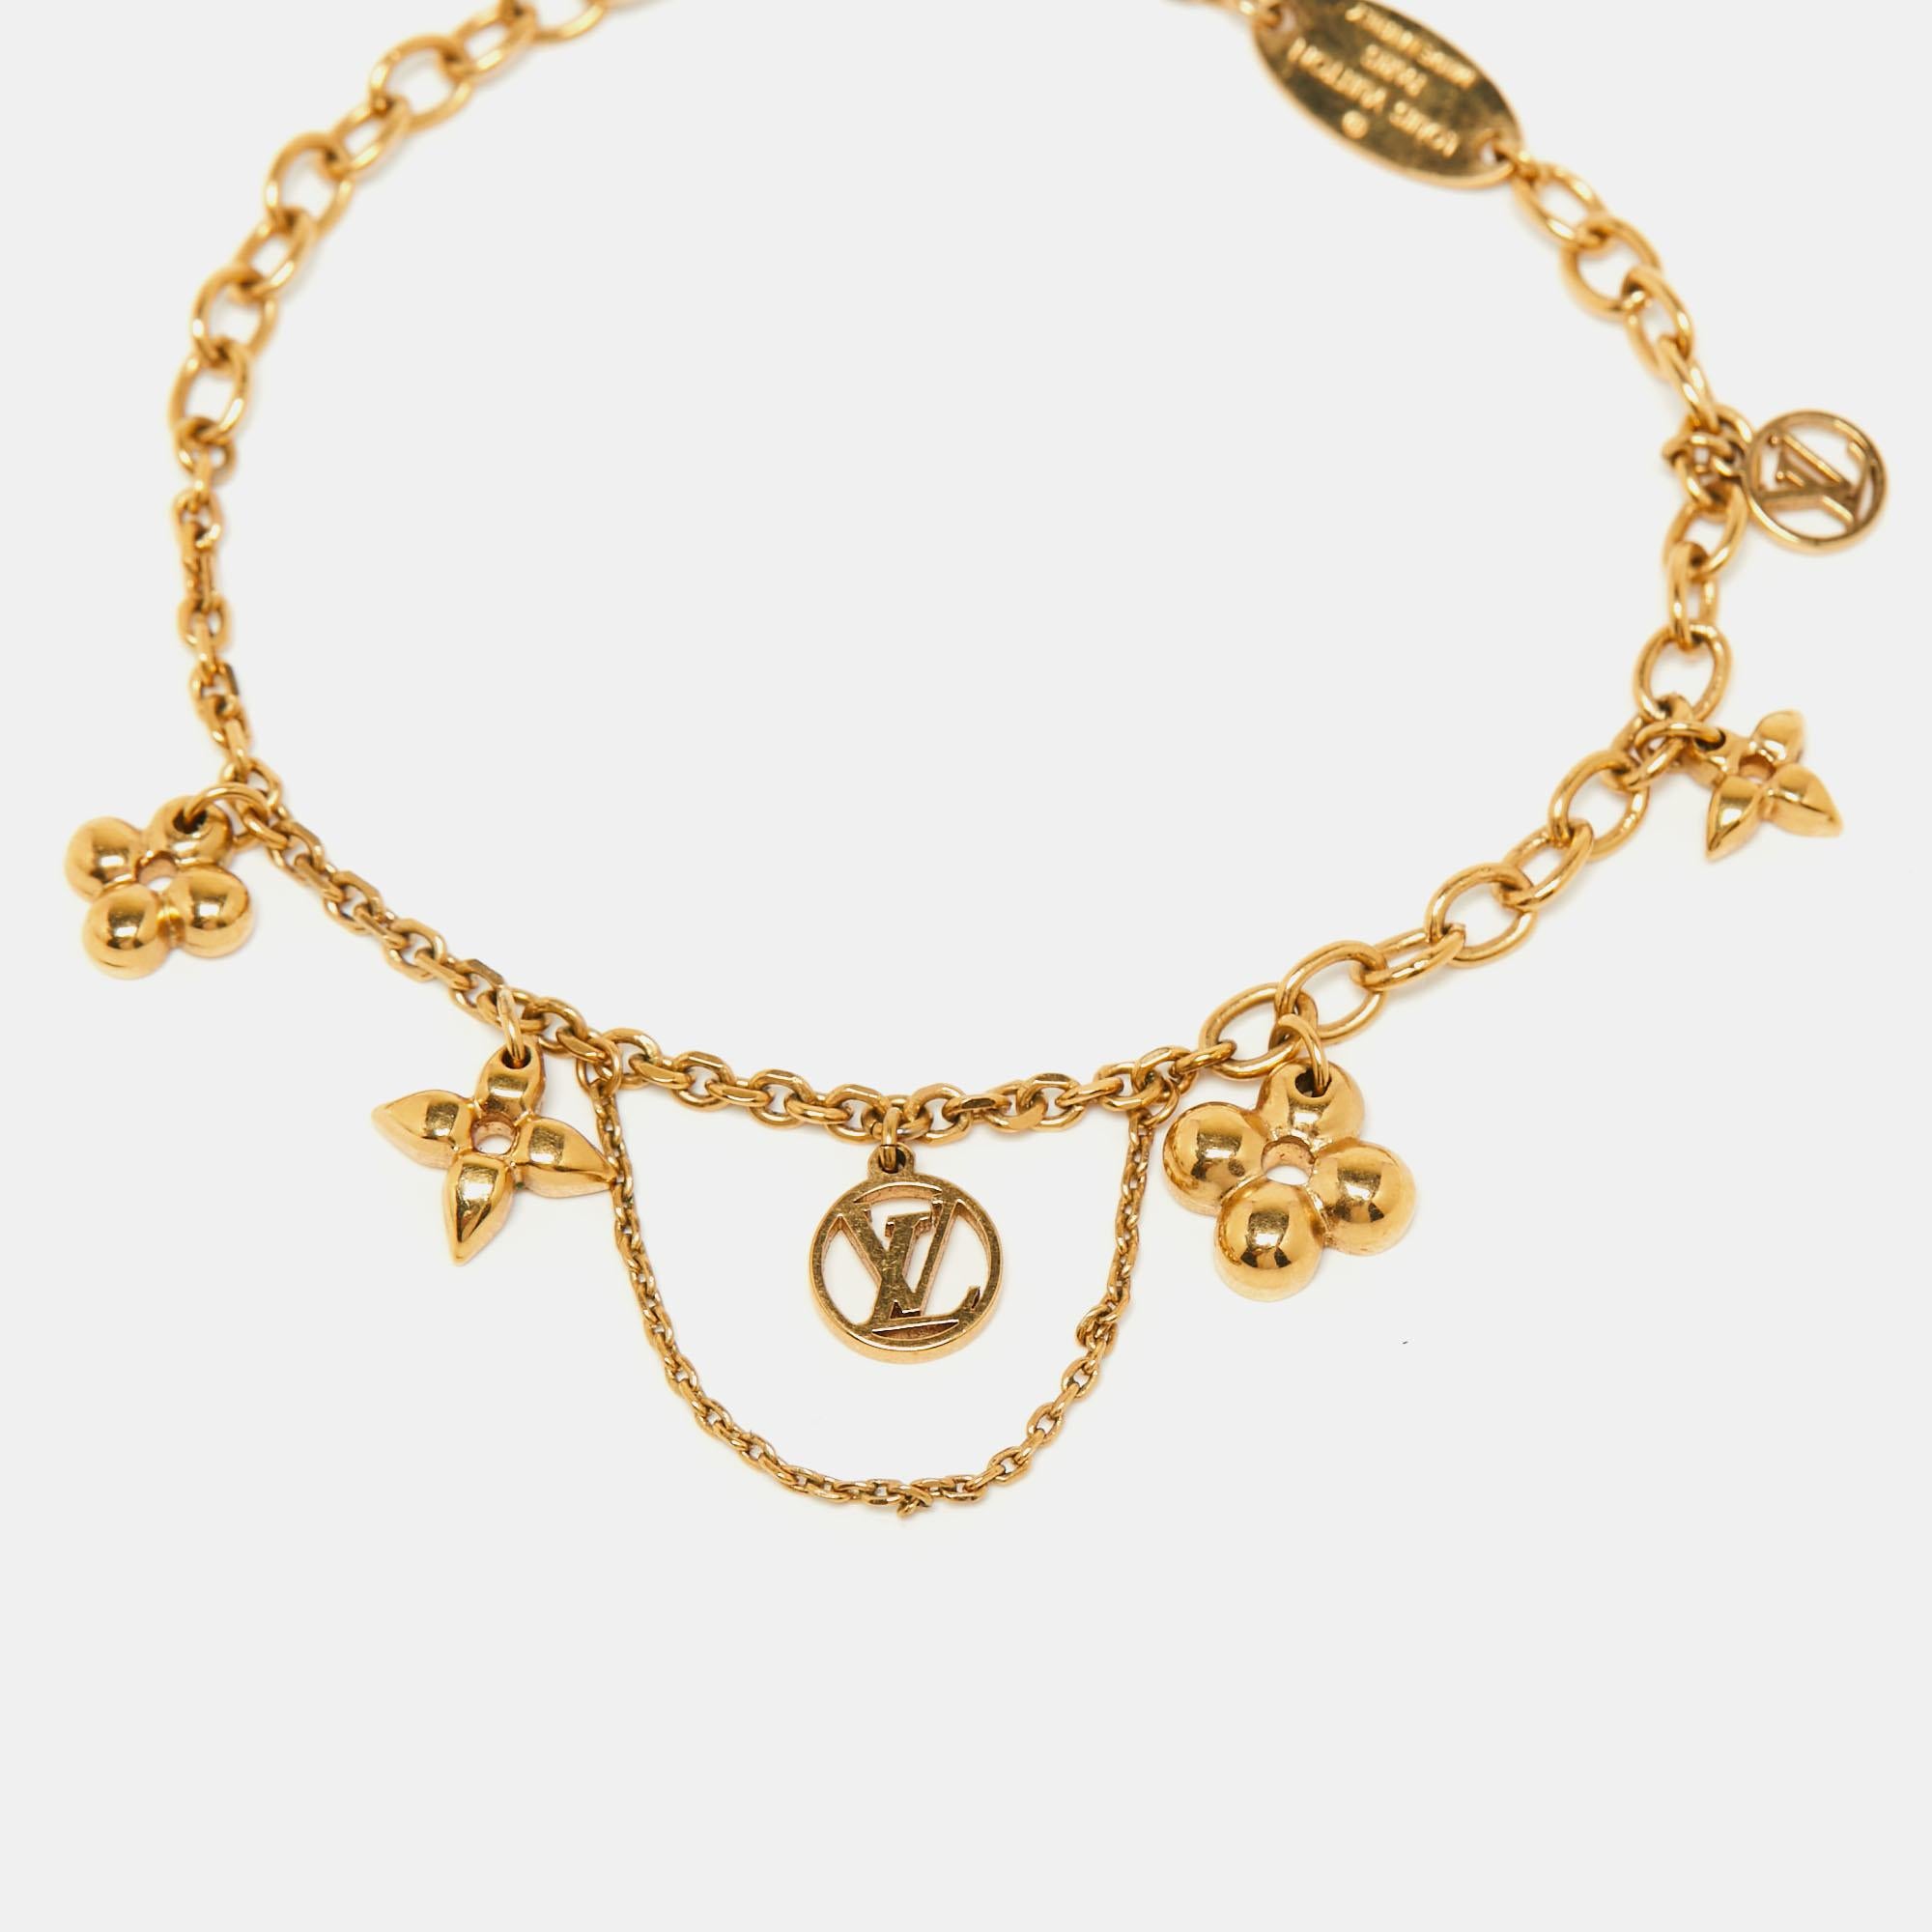 Louis Vuitton offers this beautiful bracelet to complement your style. ​Crafted from gold-tone metal, it has signature charms and the famous LV logo. The Blooming Supple bracelet fixes around the wrist with a lobster clasp.

Includes: Original Pouch
